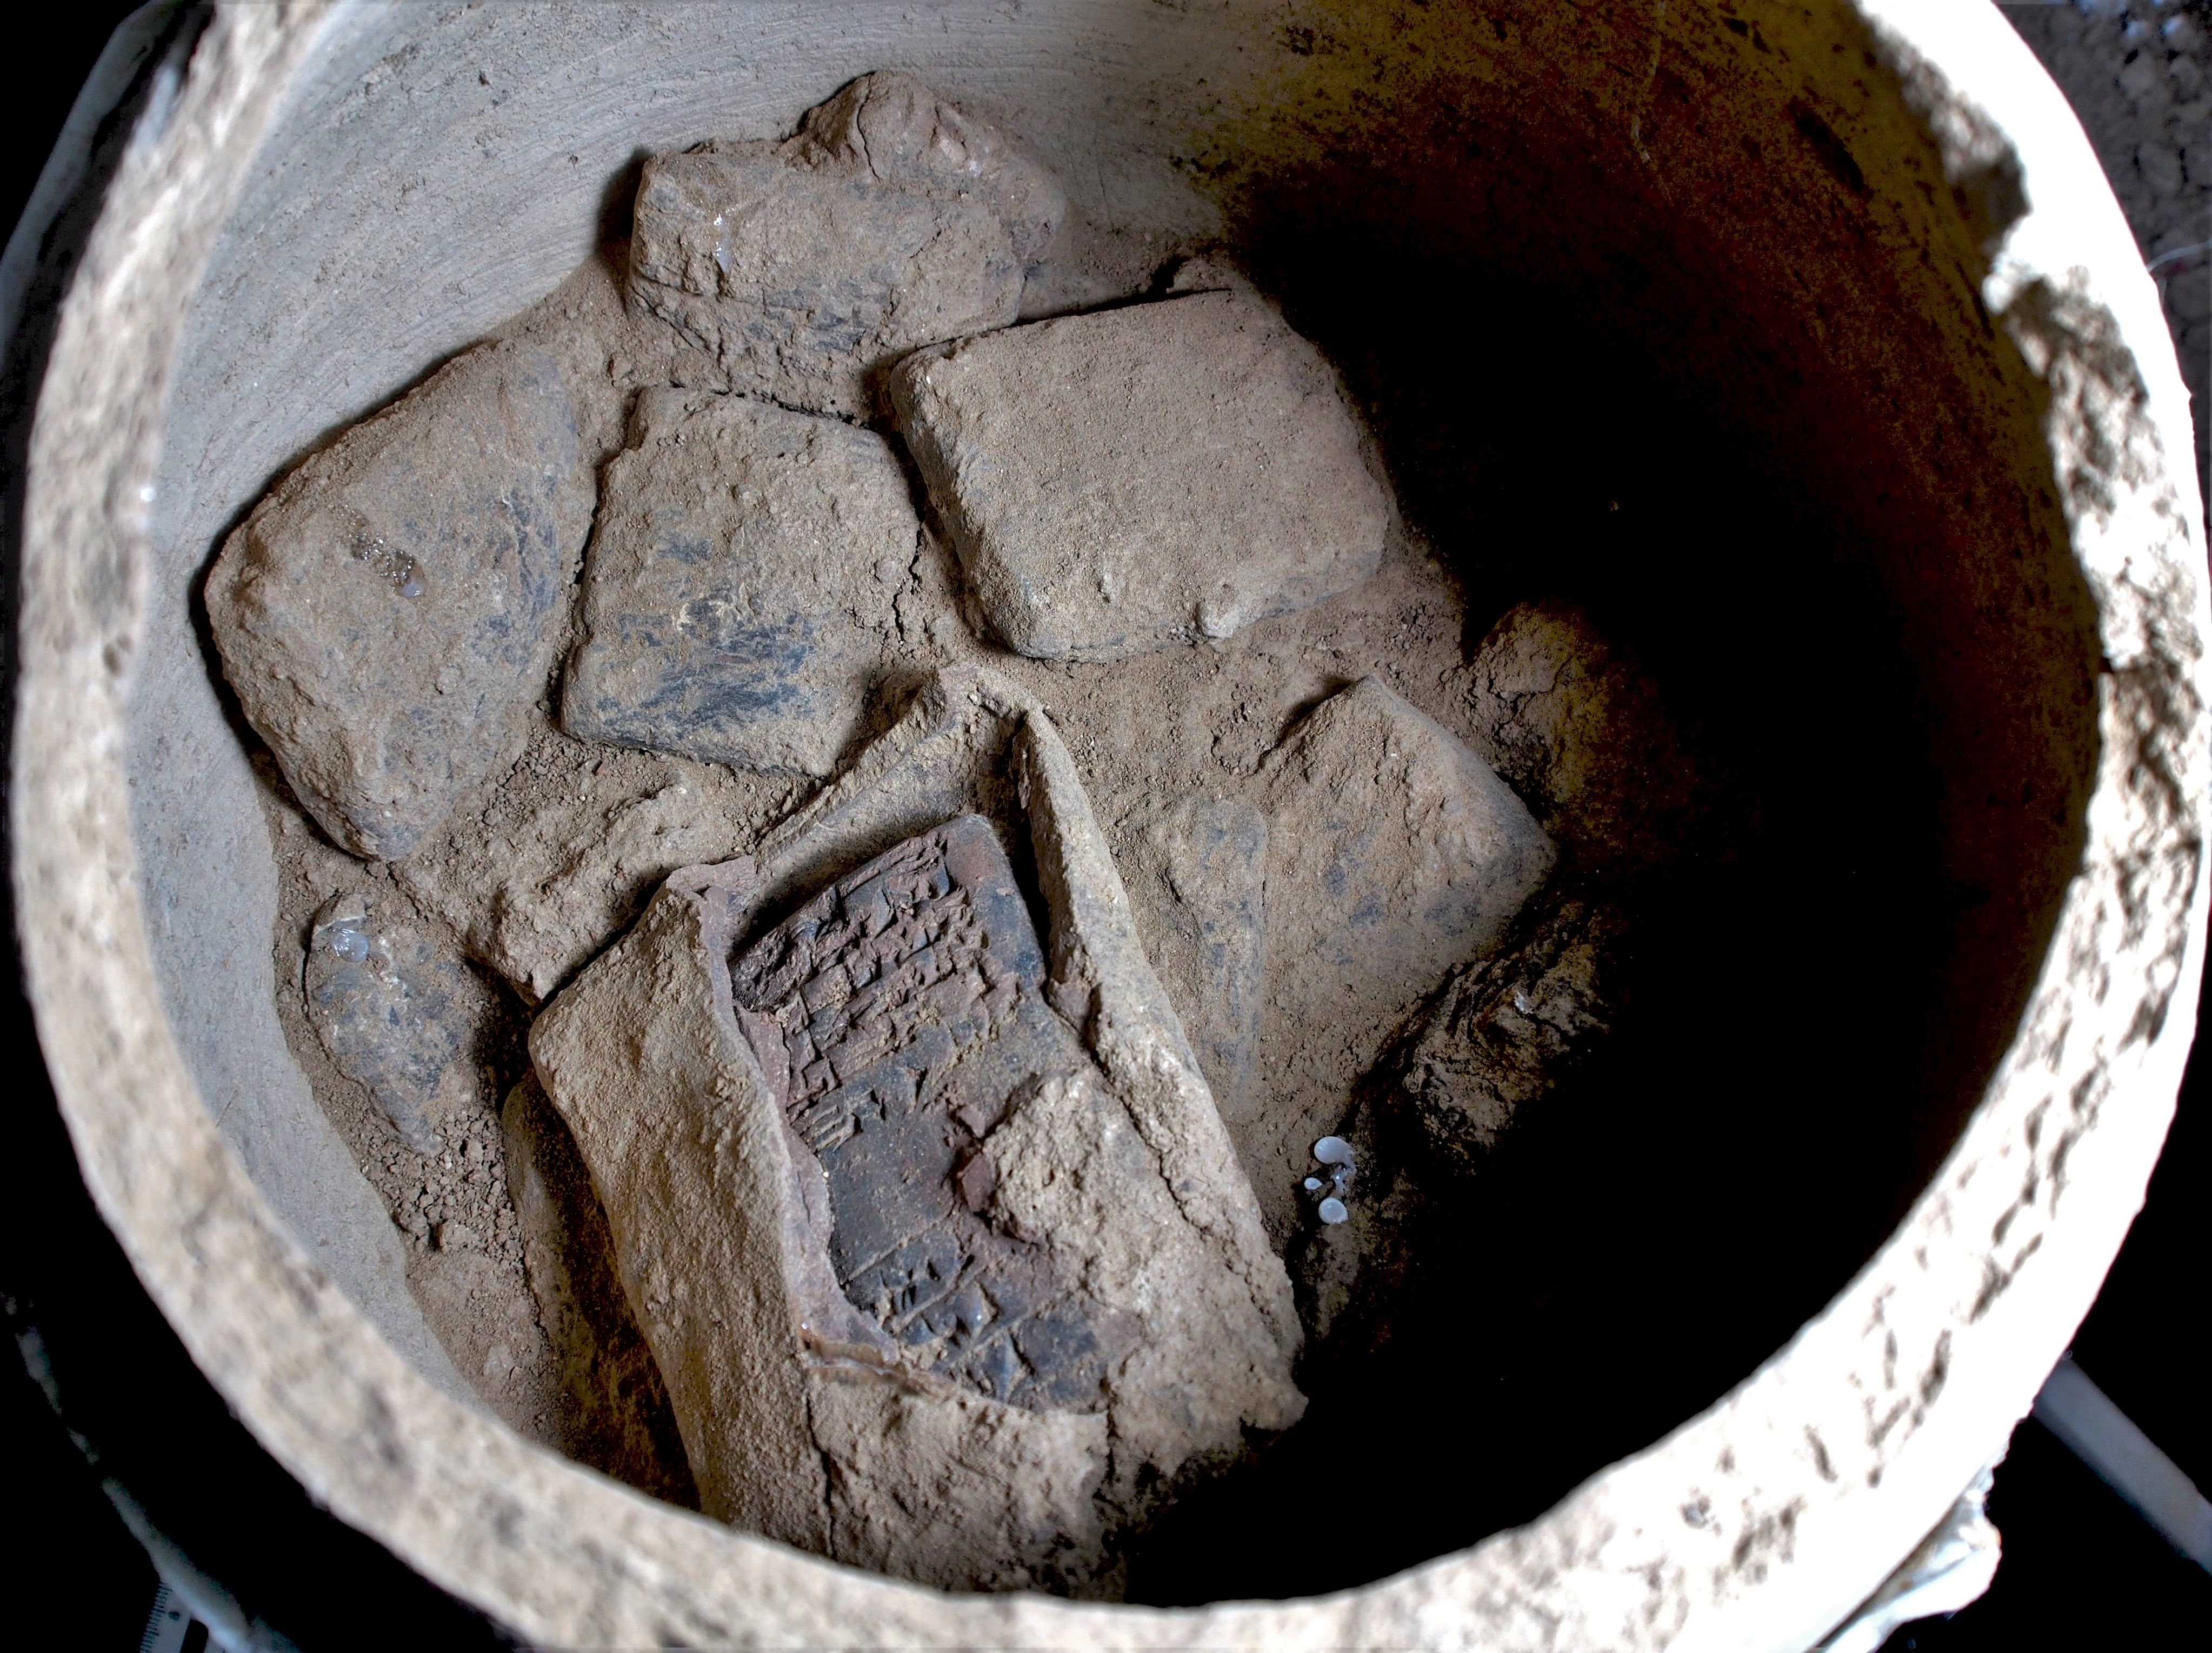 View into one of the pottery vessels with cuneiform tablets, including one tablet which is still in its original clay envelope (Photo: Universities of Freiburg and Tübingen, KAO).